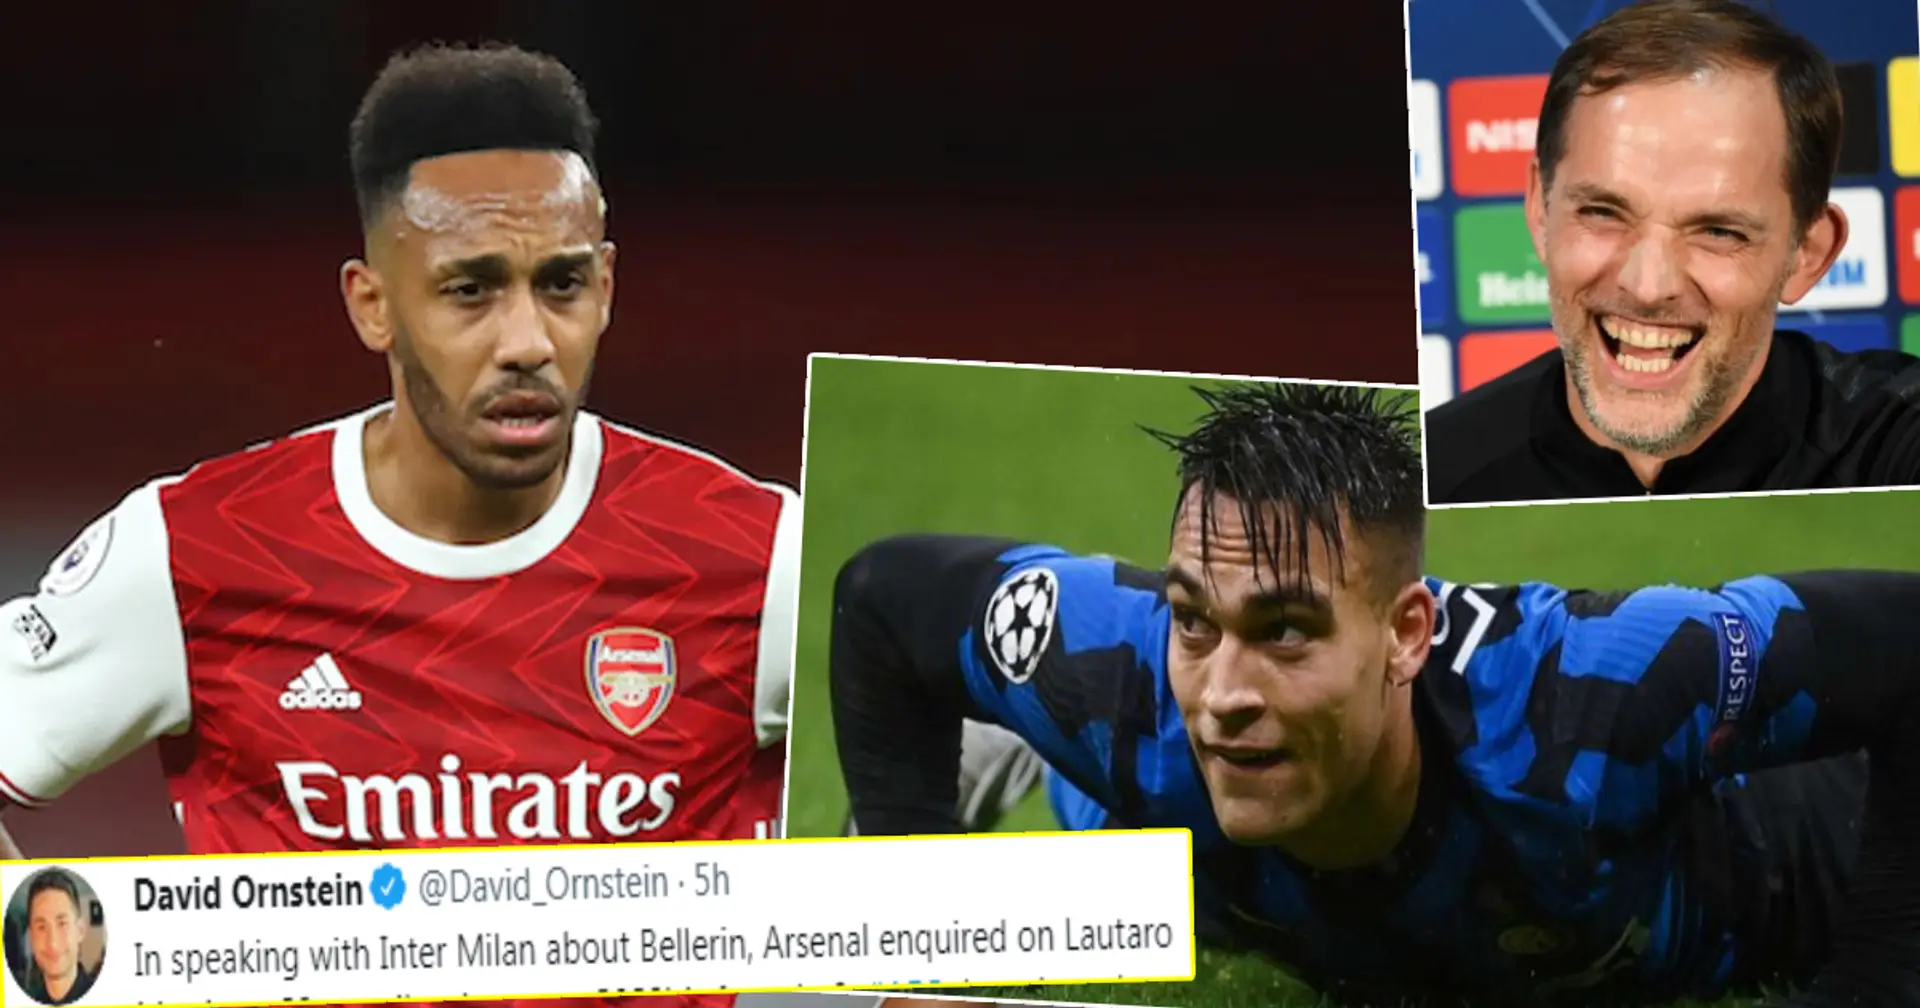 Chelsea fan brutally explains why you shouldn't worry about Arsenal even if they sign Lautaro